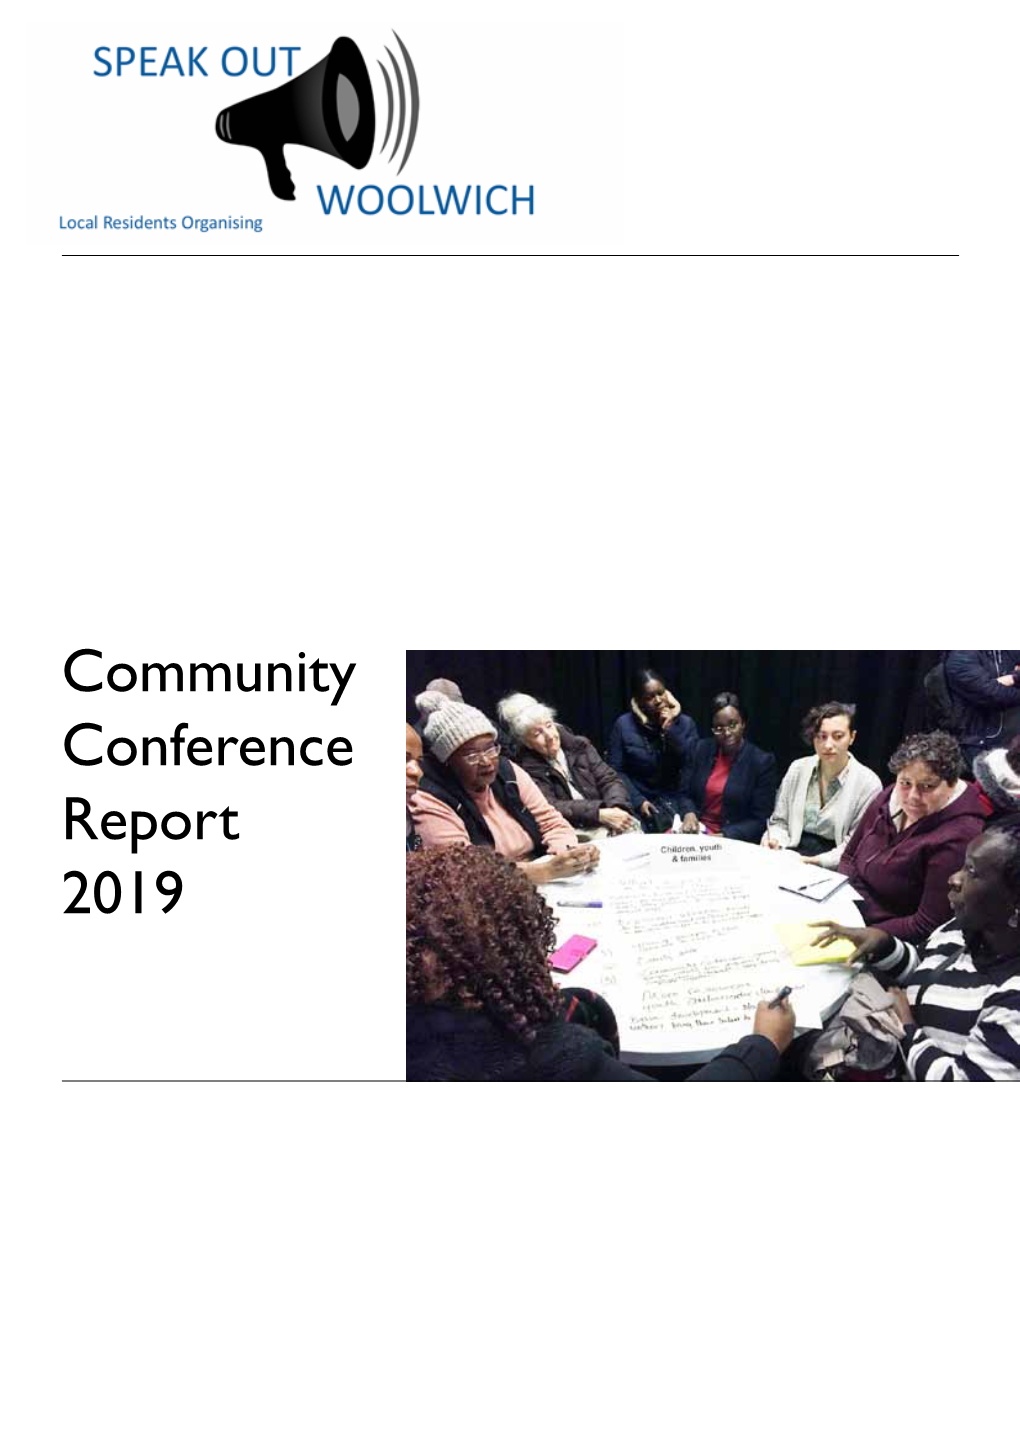 Community Conference Report 2019 Speak out Woolwich Community Conference 2019